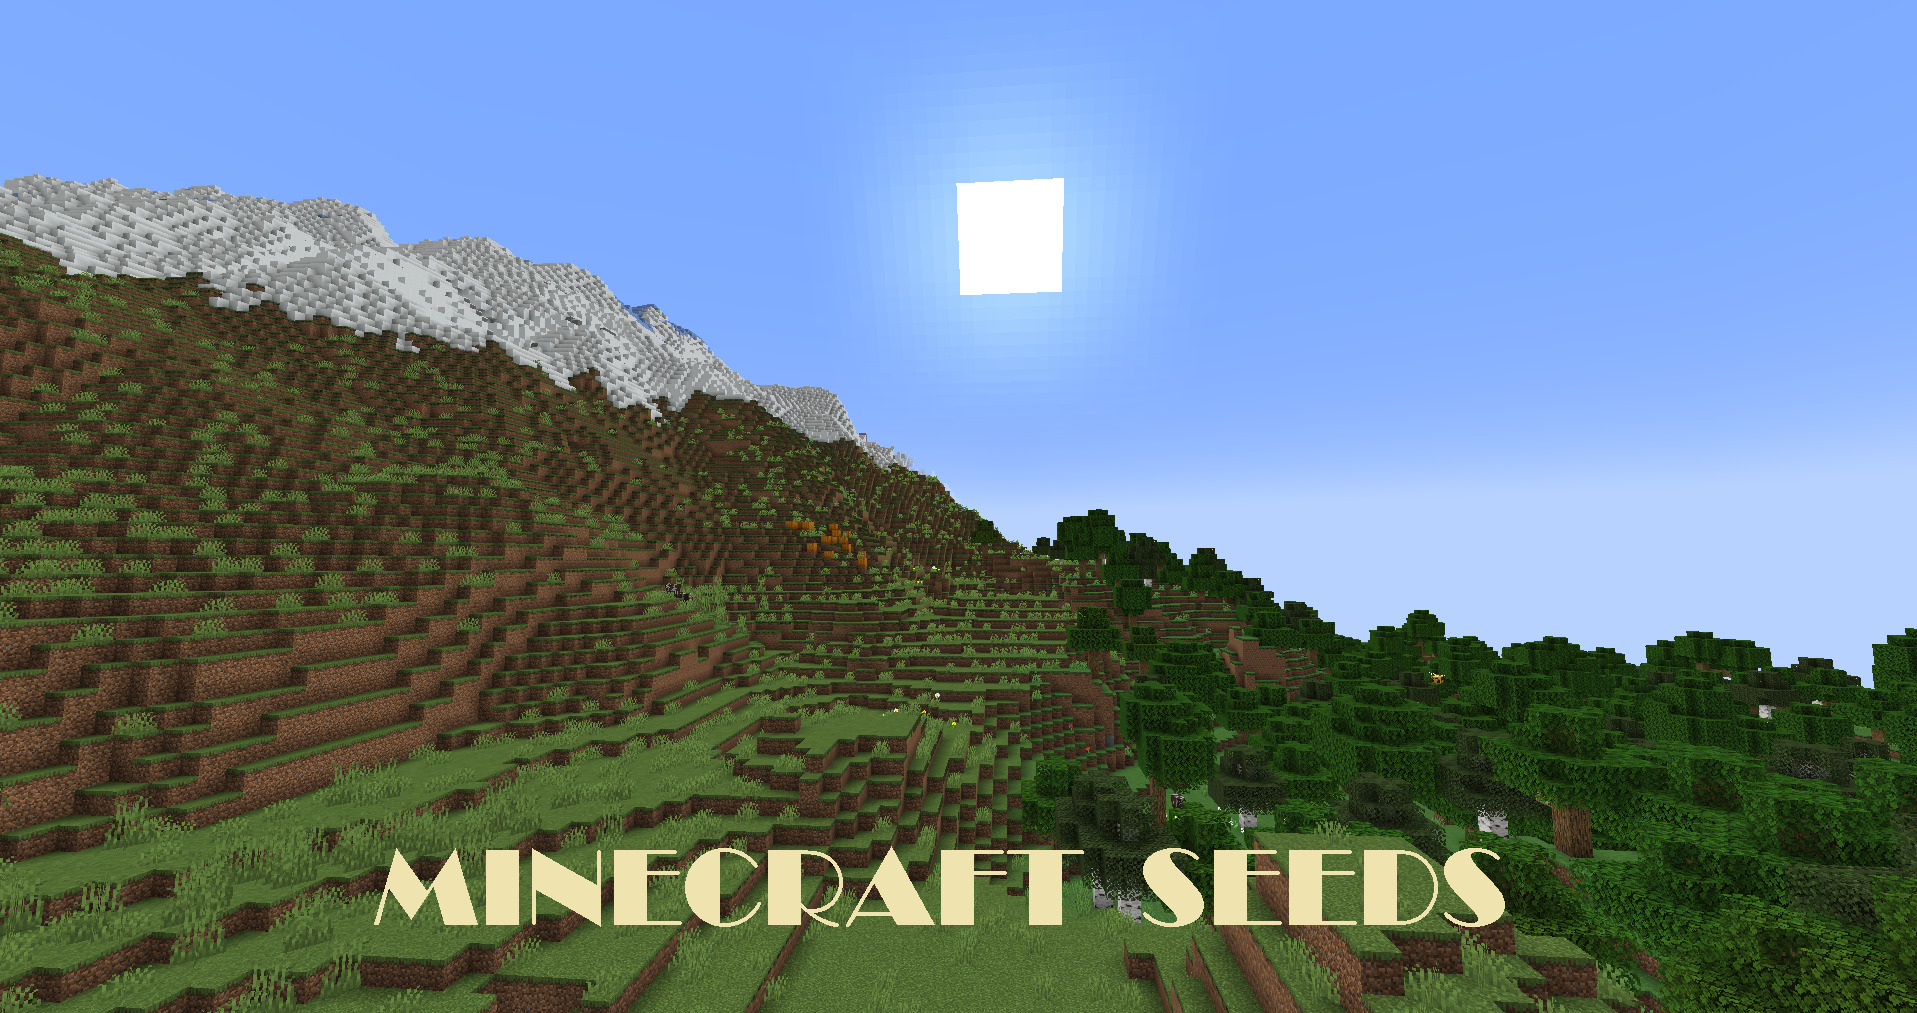 How To Find the Seed of a Server in Minecraft